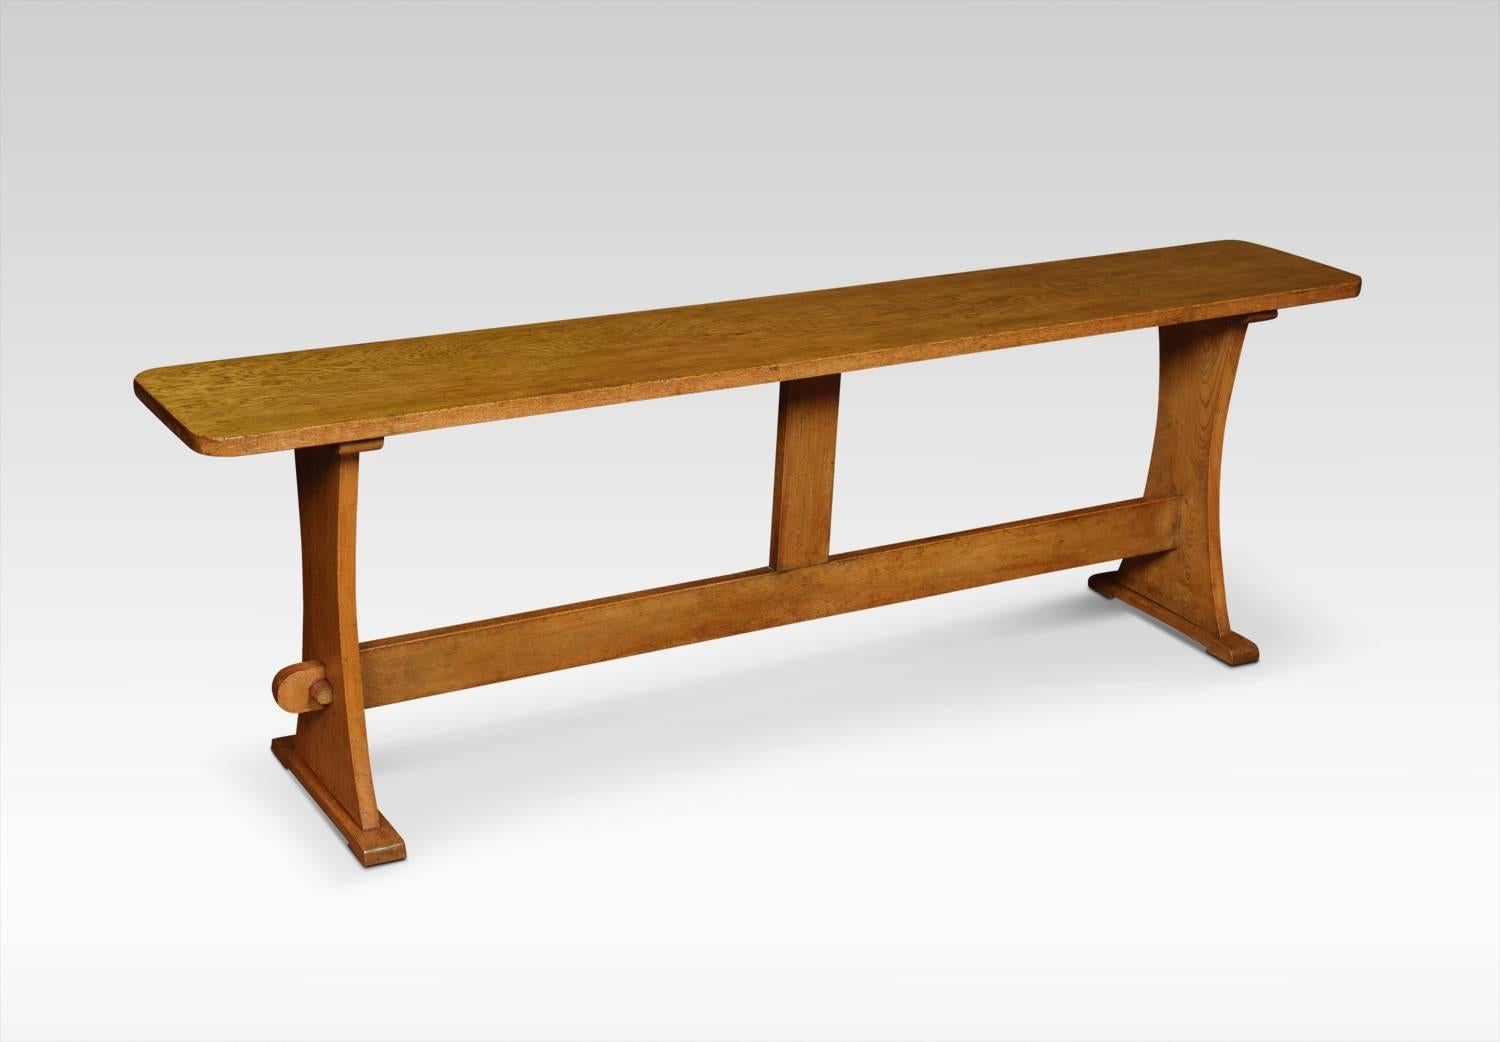 Pair of benches, the large rectangular solid oak seats raised up on trestle ends united by stretcher
Dimensions:
Height 19.5 inches
Width 60.5 inches
Depth 10 inches.